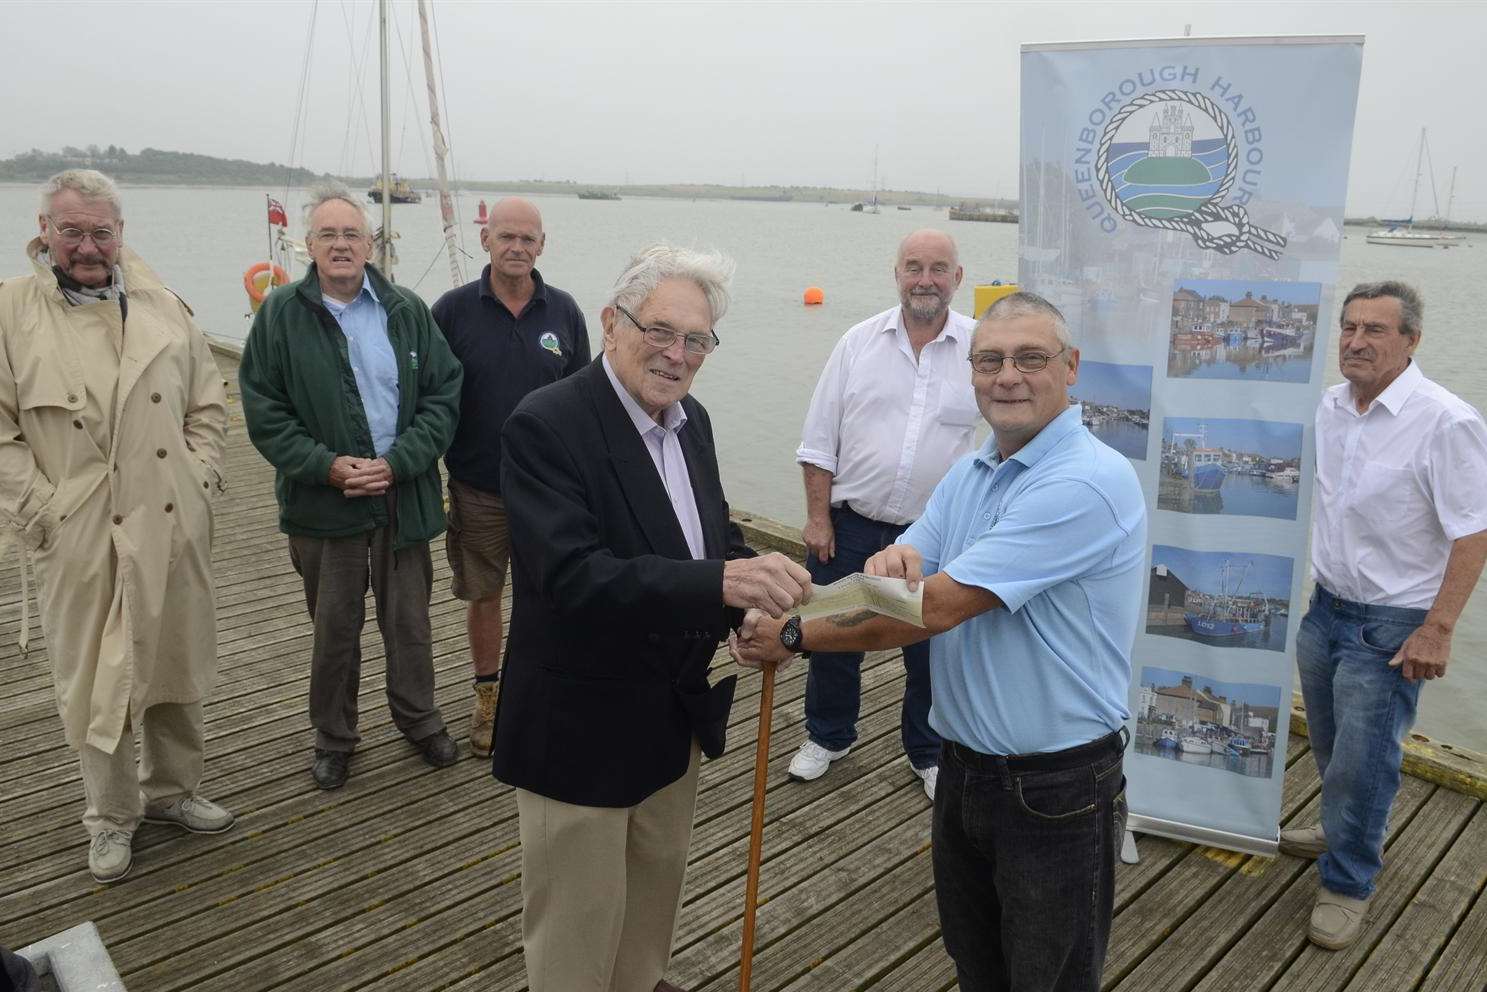 Bob Eatwell, chairman of the Queenborough Harbour Trust, watched by fellow members, presents Eddie Johnson with a cheque for £500.